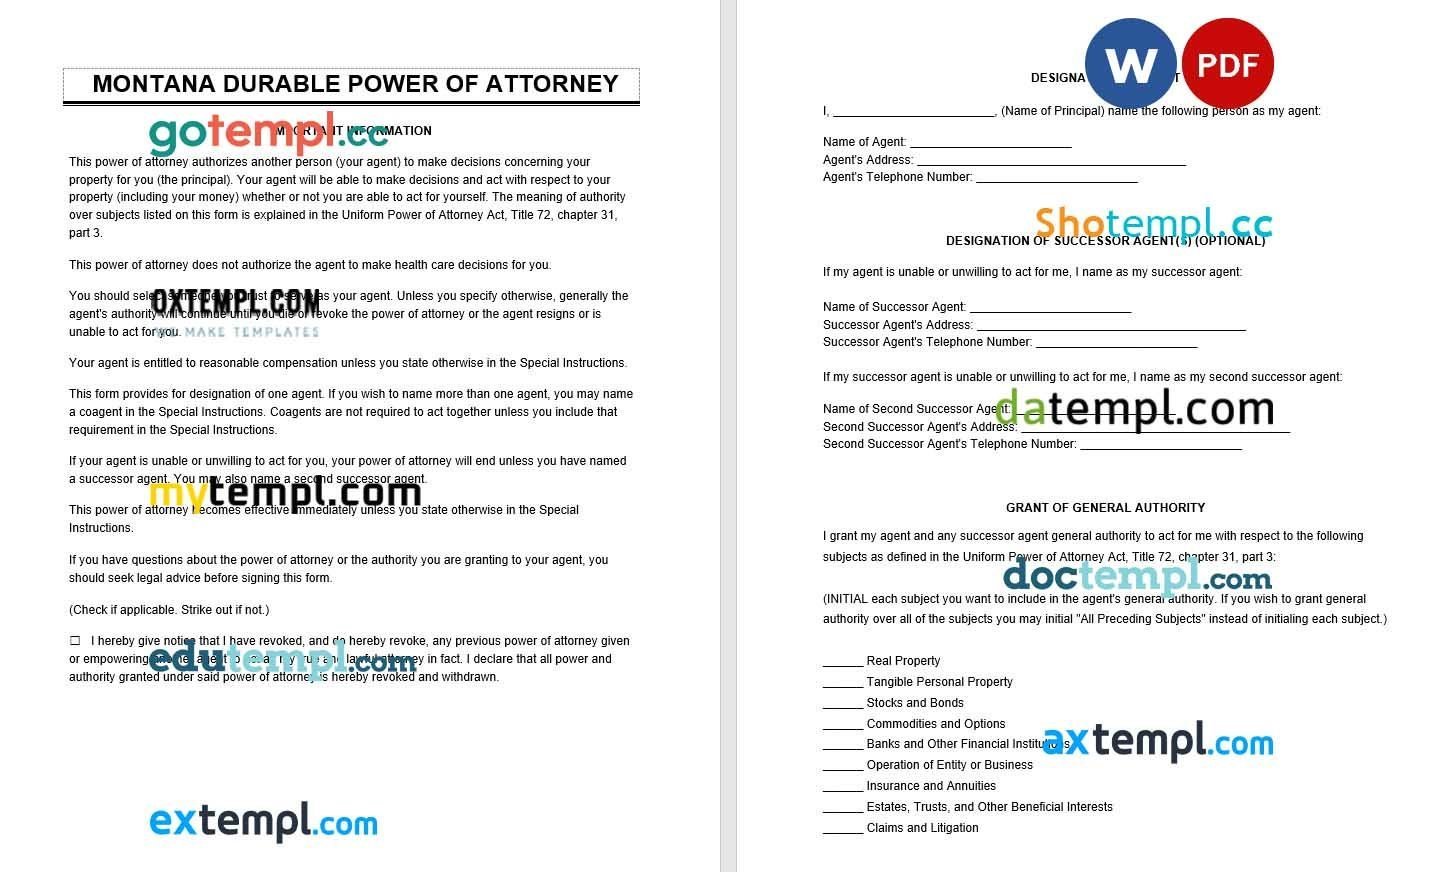 Montana Durable Power of Attorney example, fully editable